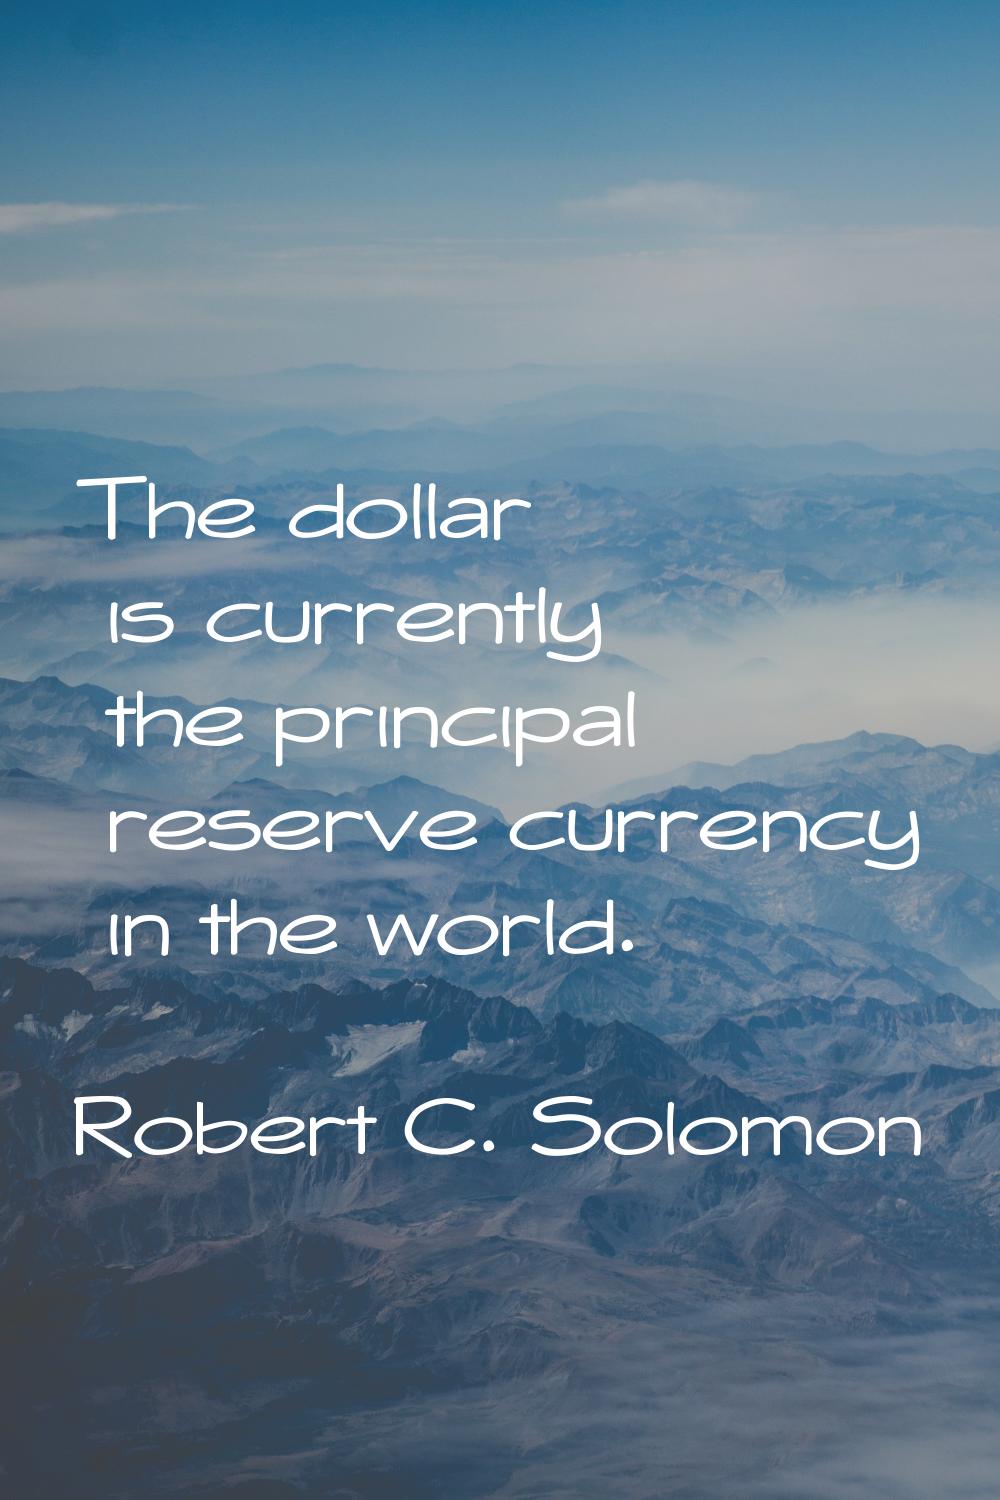 The dollar is currently the principal reserve currency in the world.